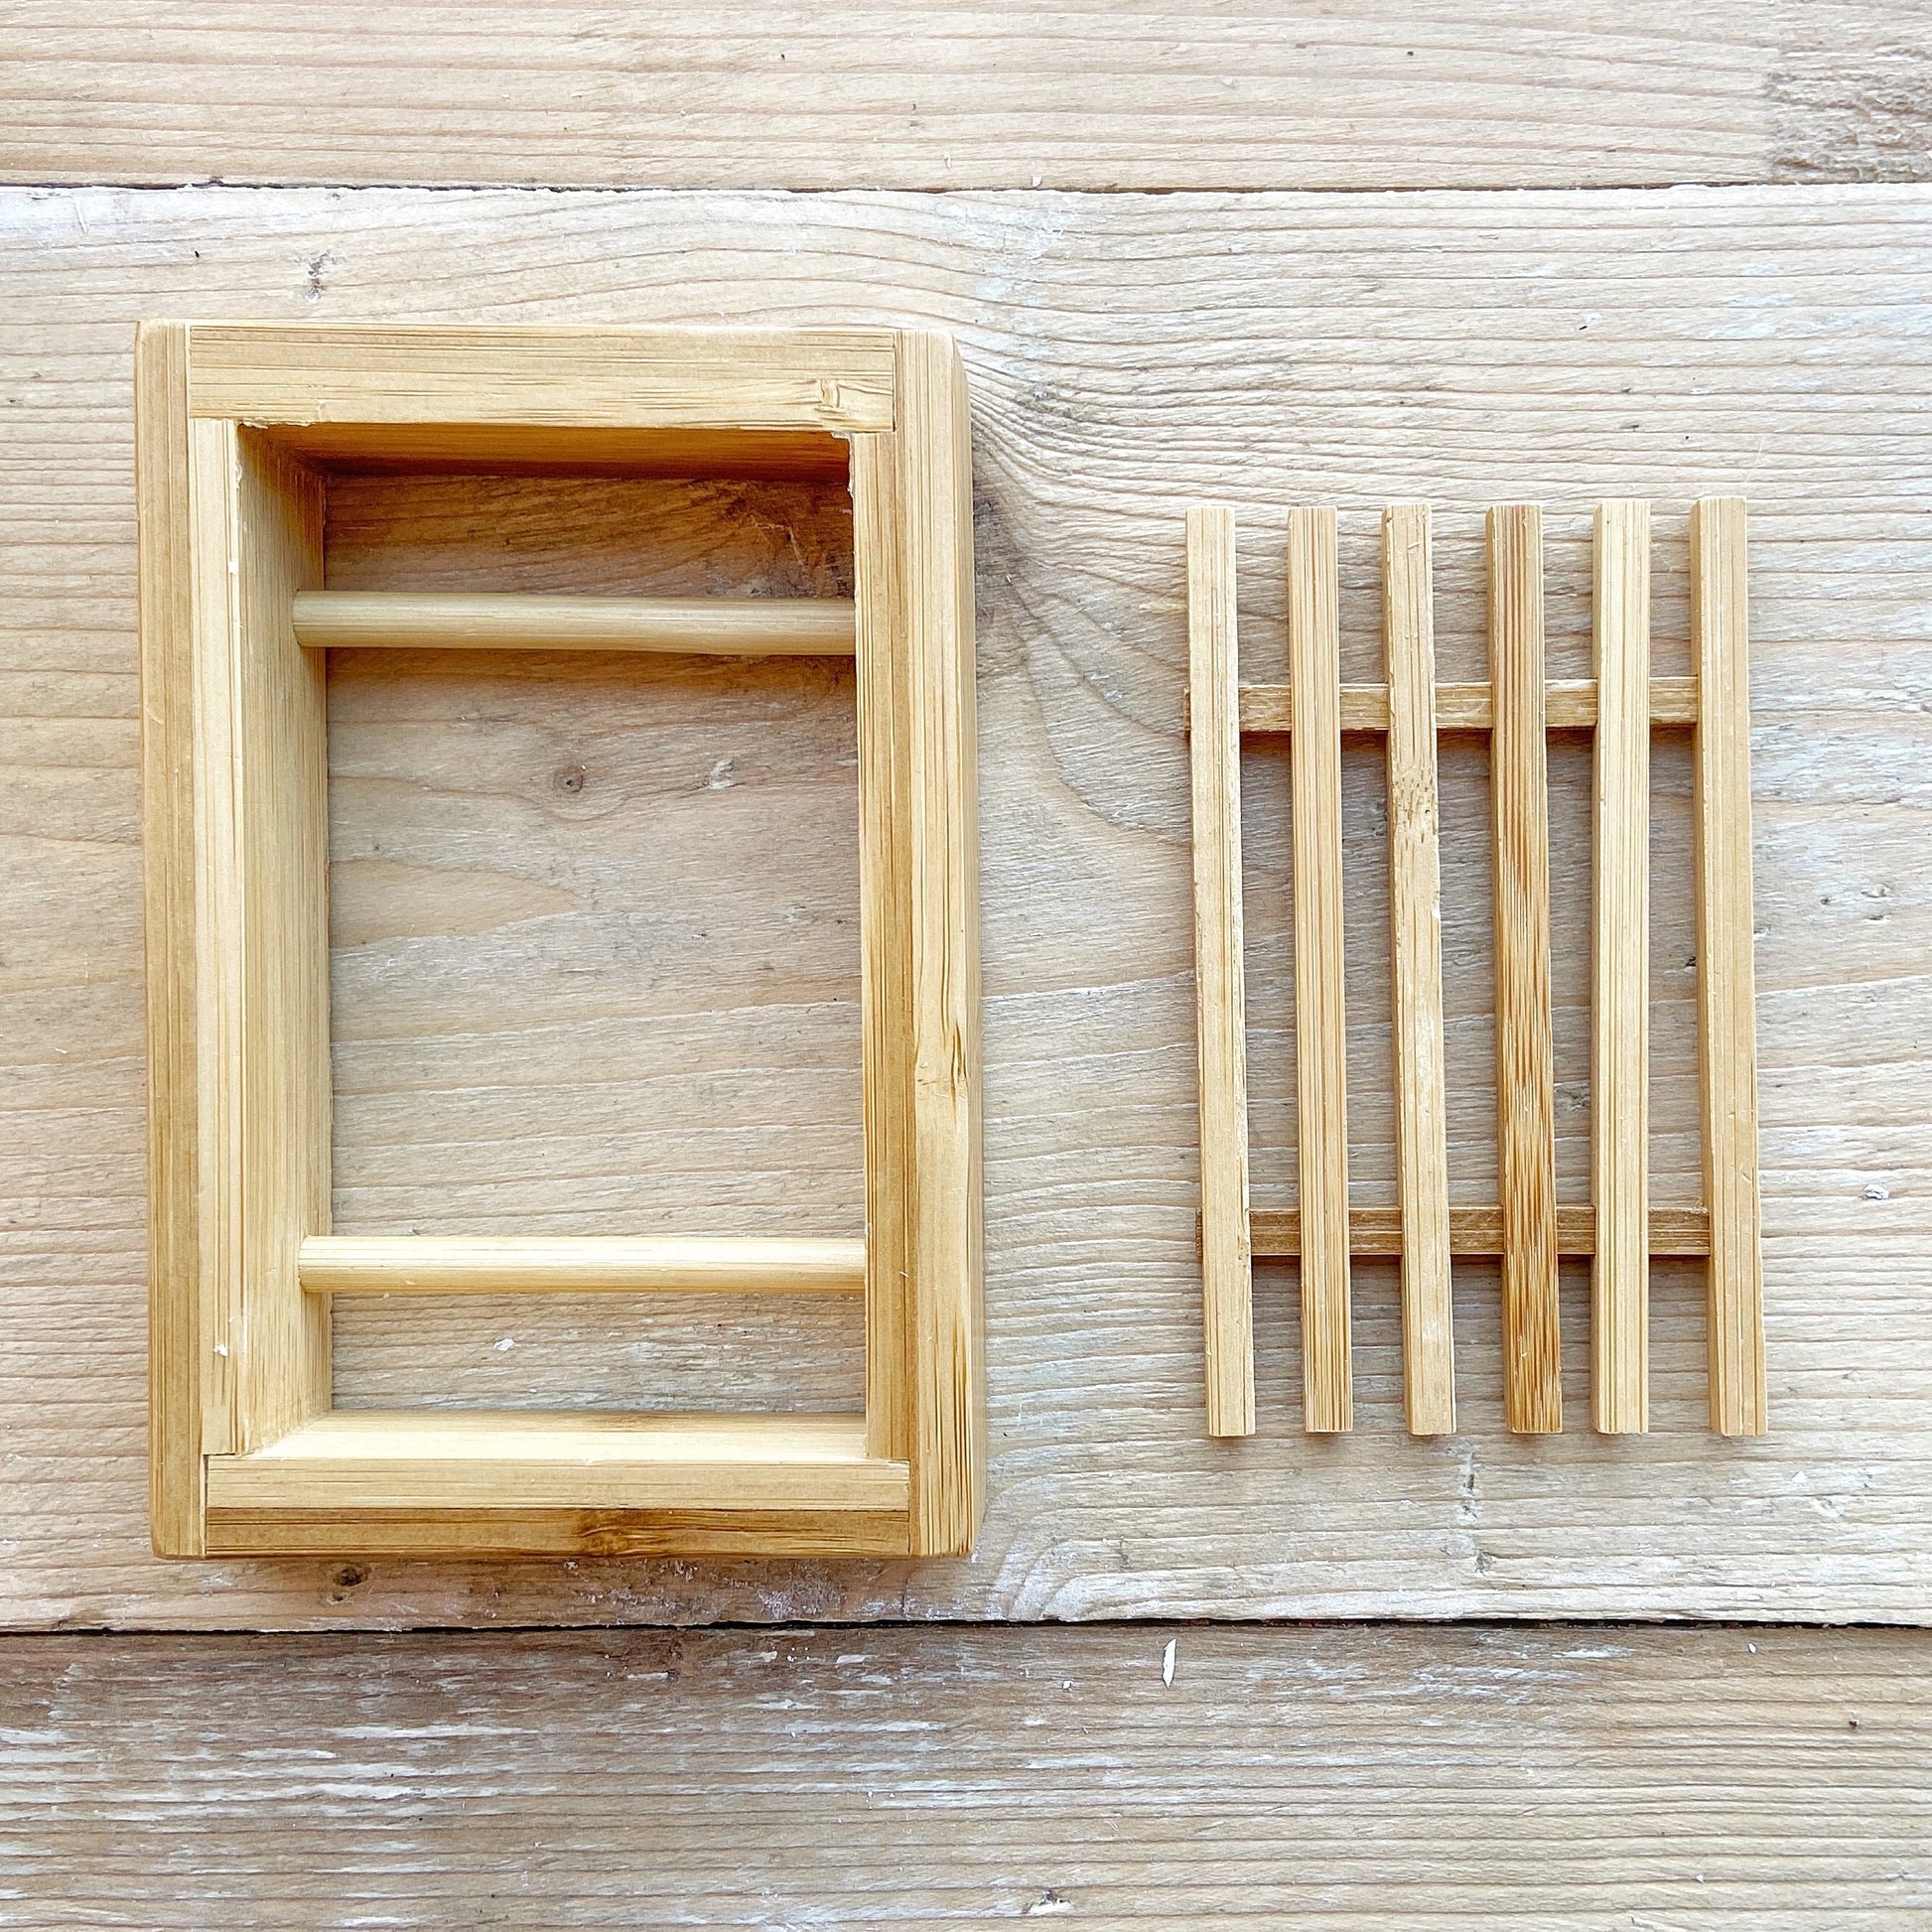 Bamboo Soap Dish - Eco-friendly soap holder made from bamboo